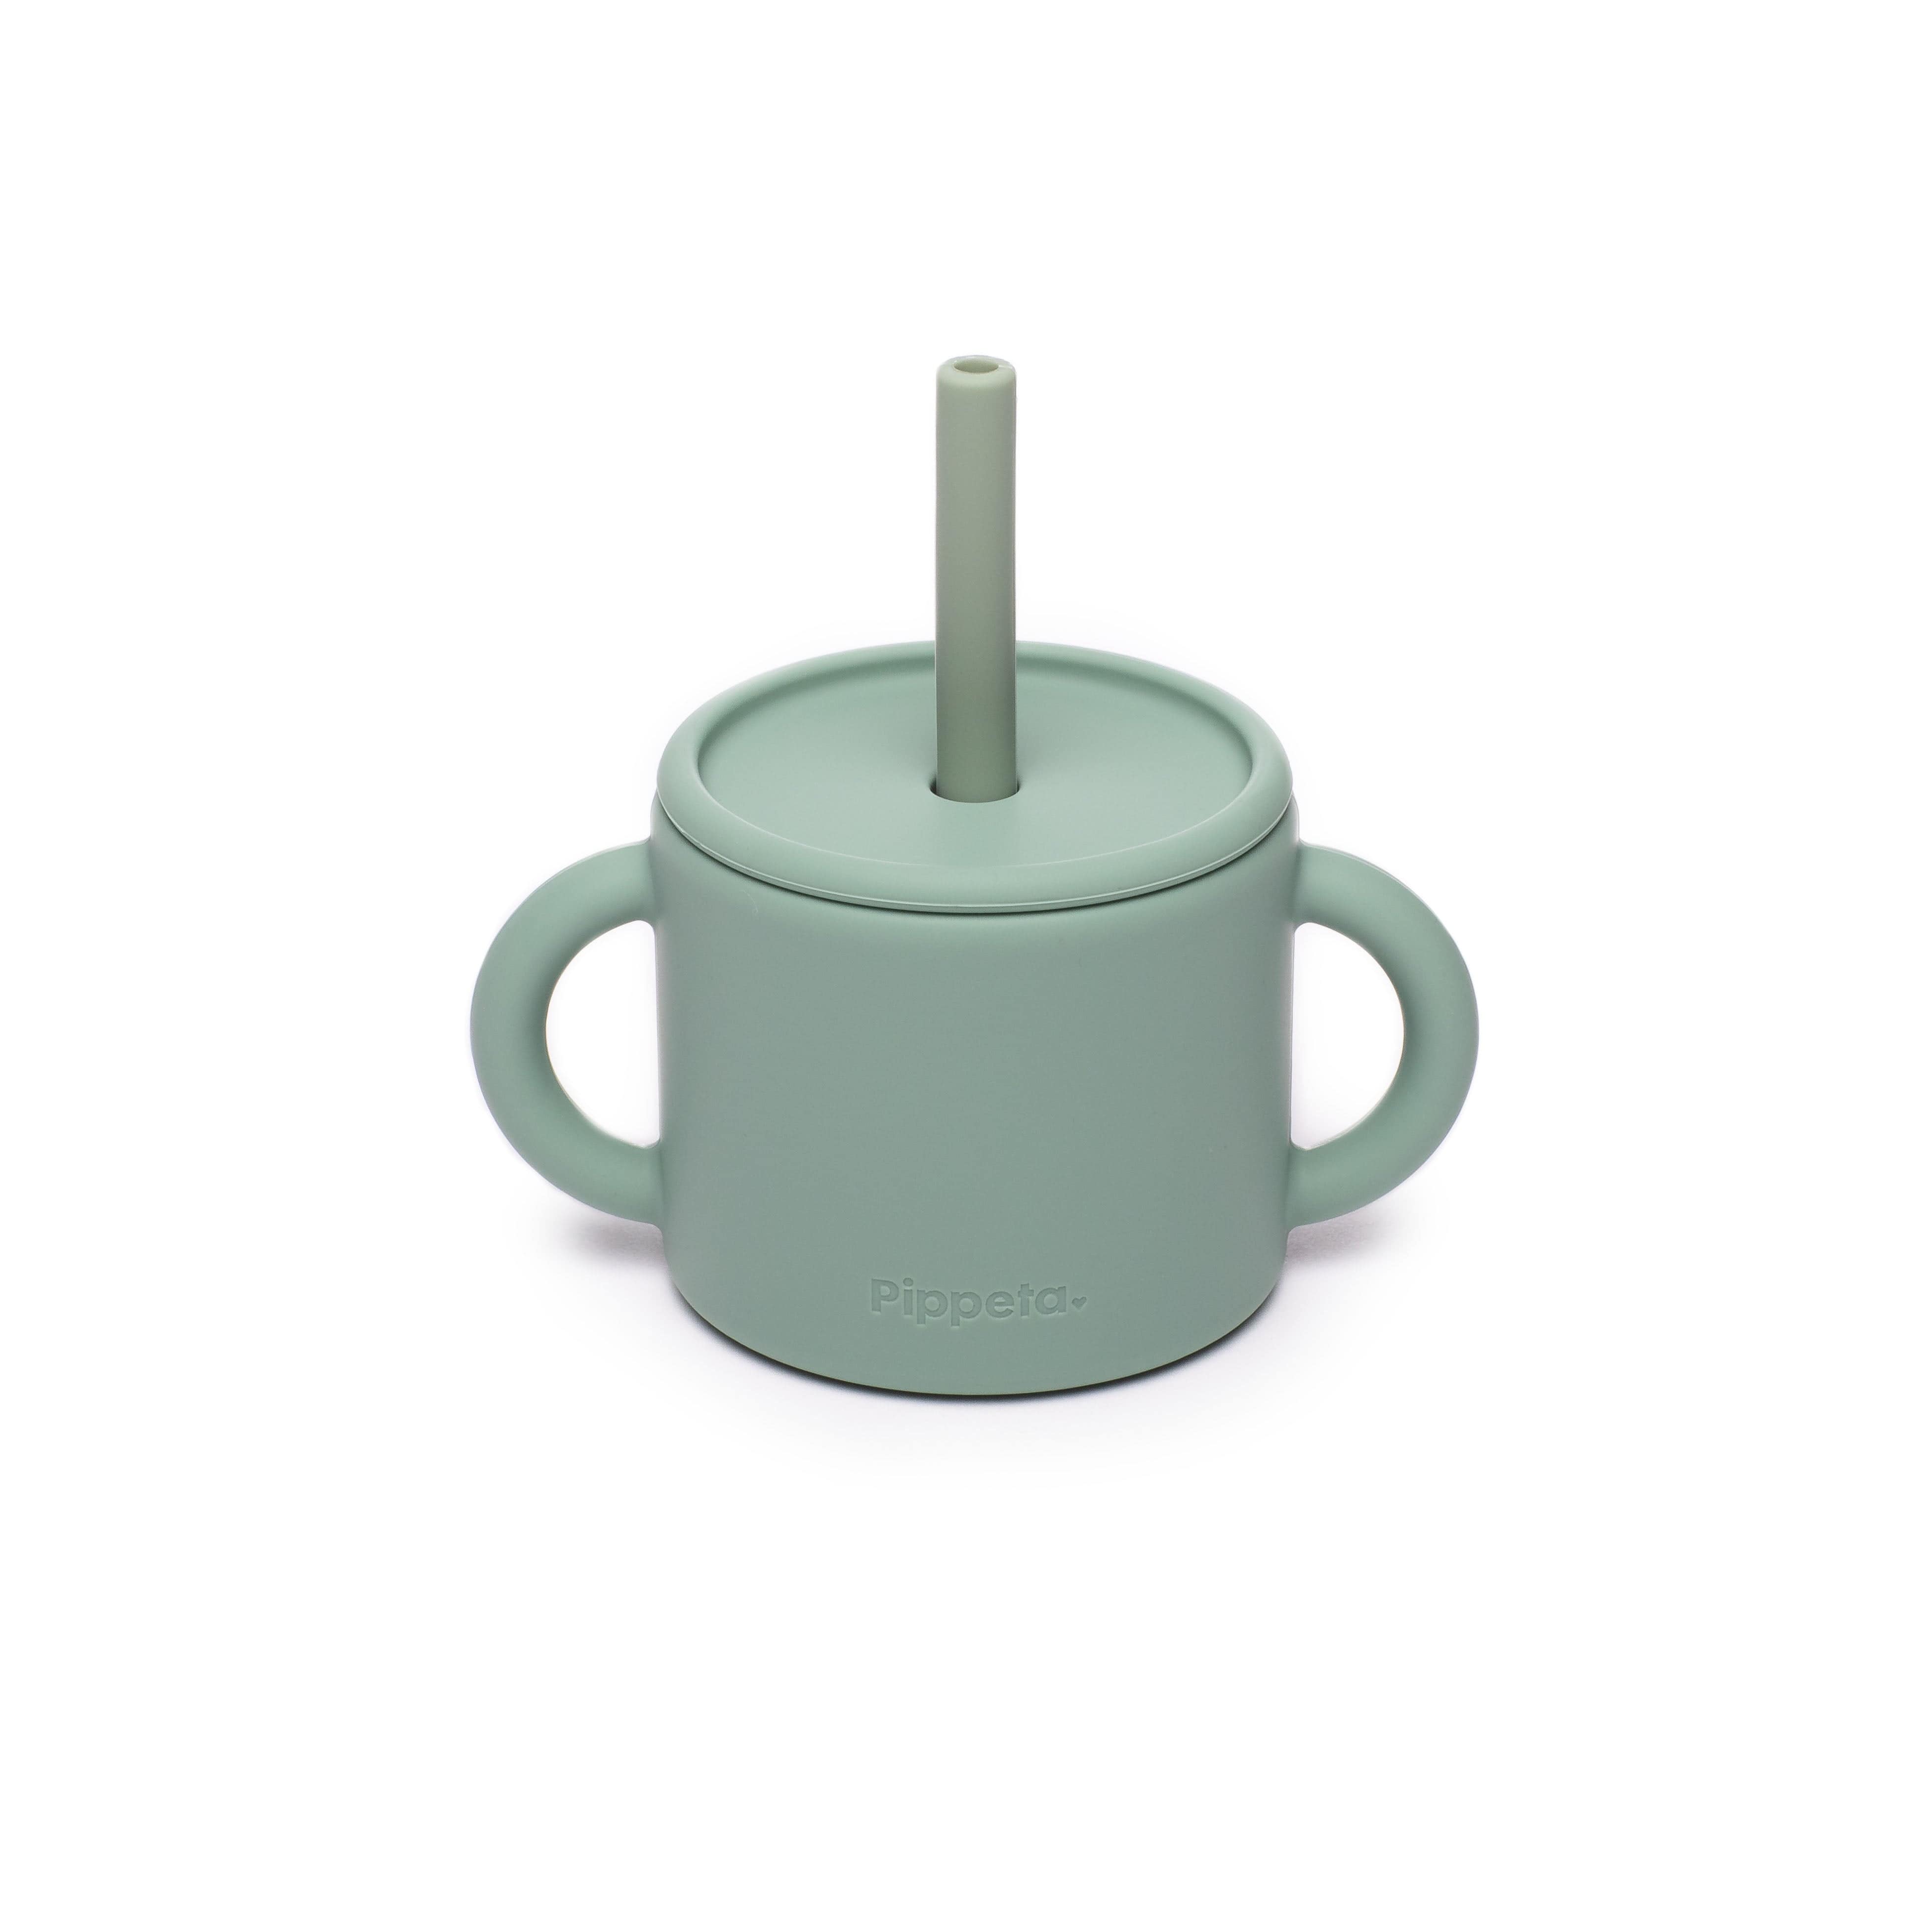 Pippeta Silicon Cup & Straw (Meadow Green)